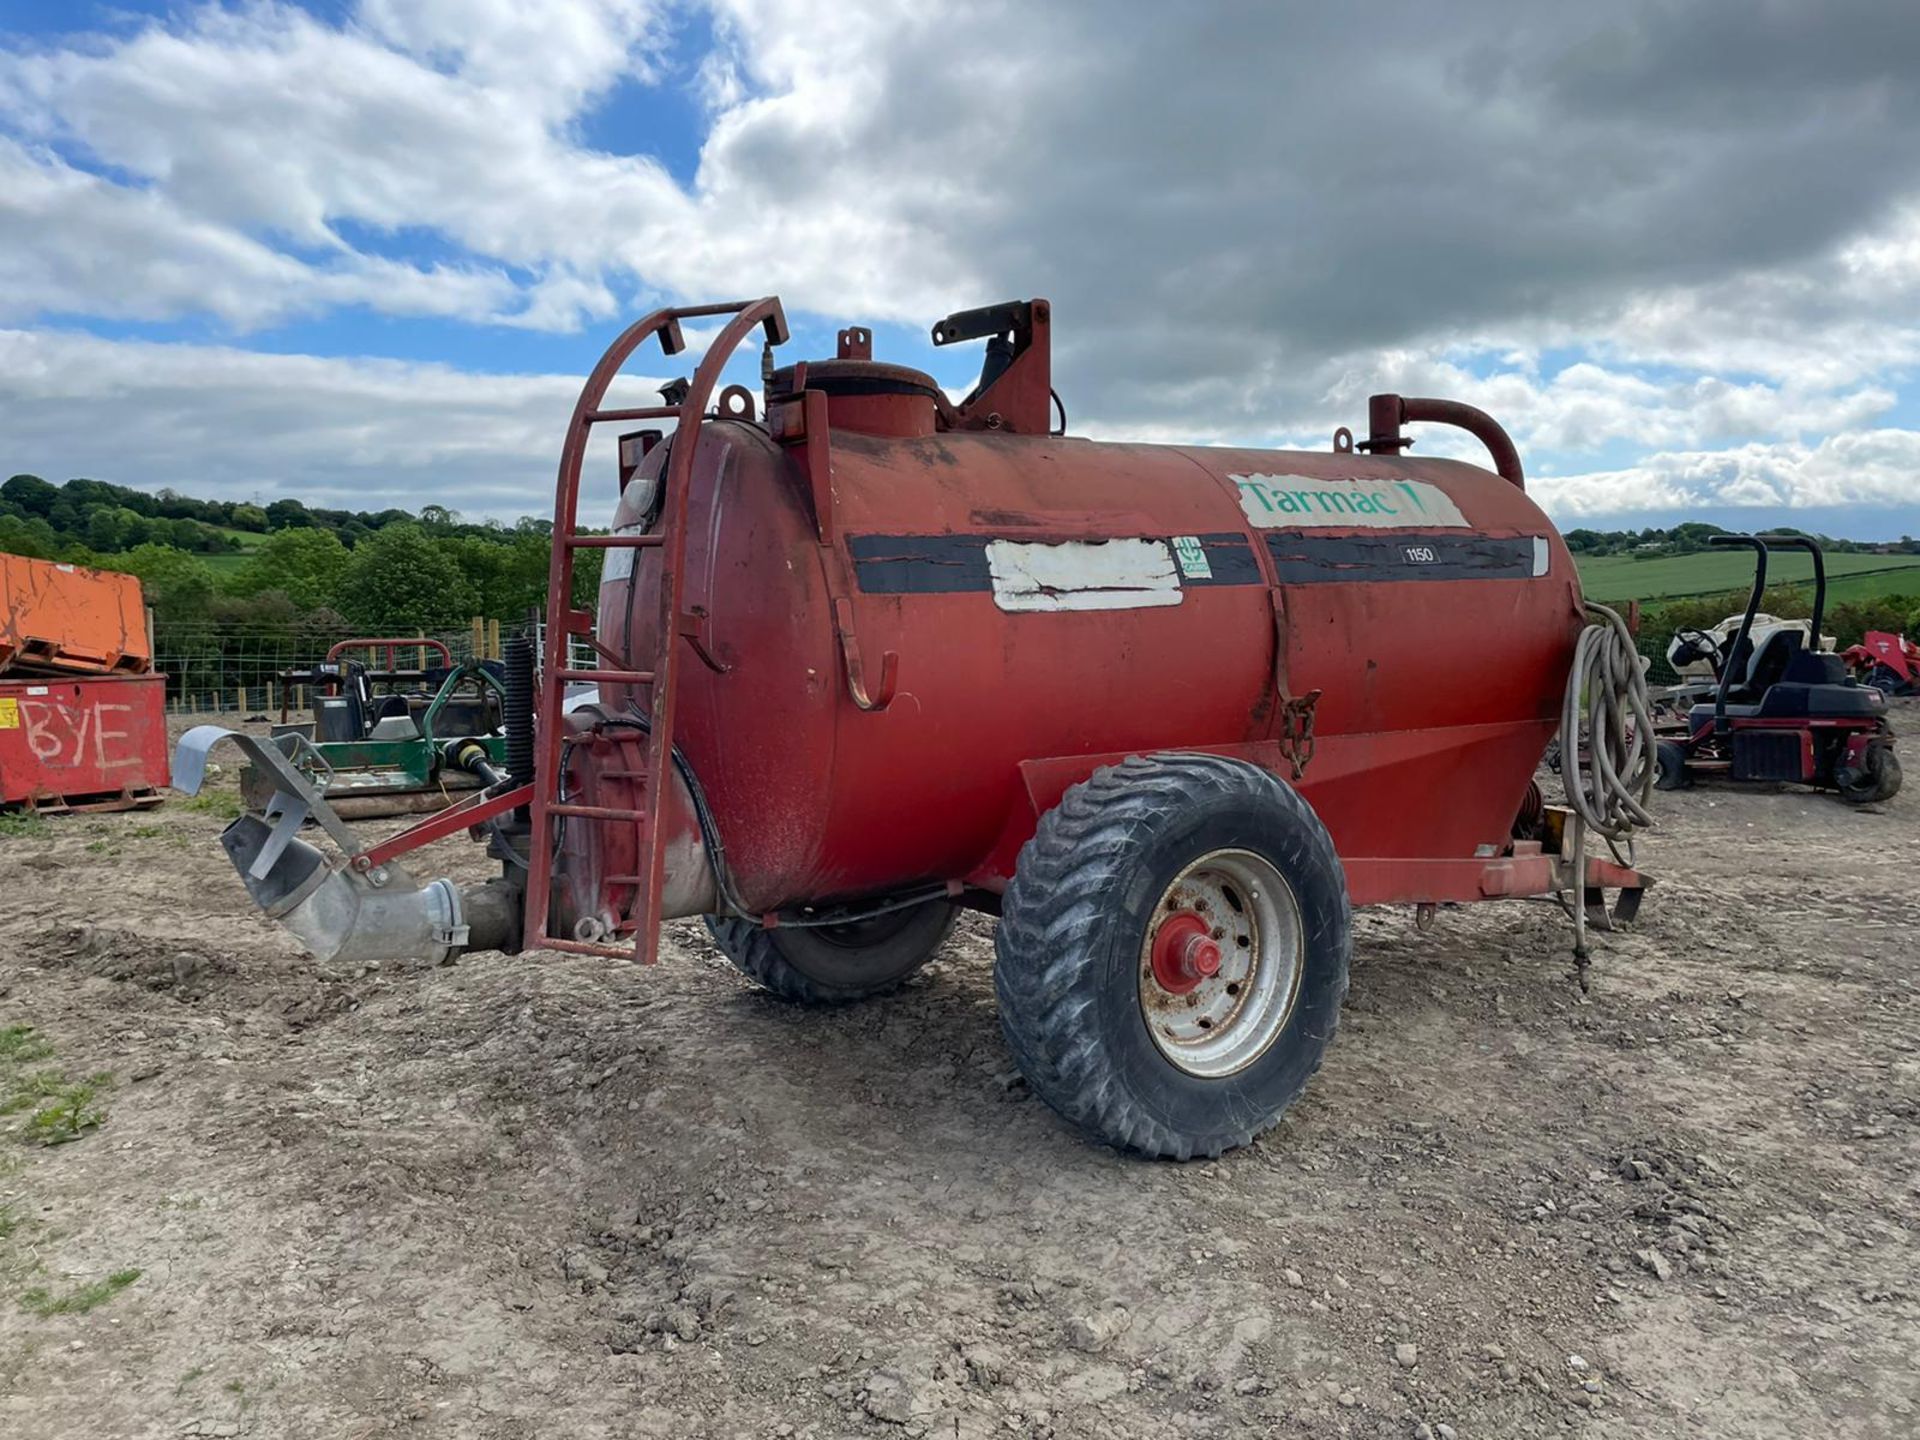 HISPEC 1150 SINGLE AXLE WATER TANKER, GOOD SET OF TYRES, BEEN USED FOR WATER *PLUS VAT* - Image 10 of 10